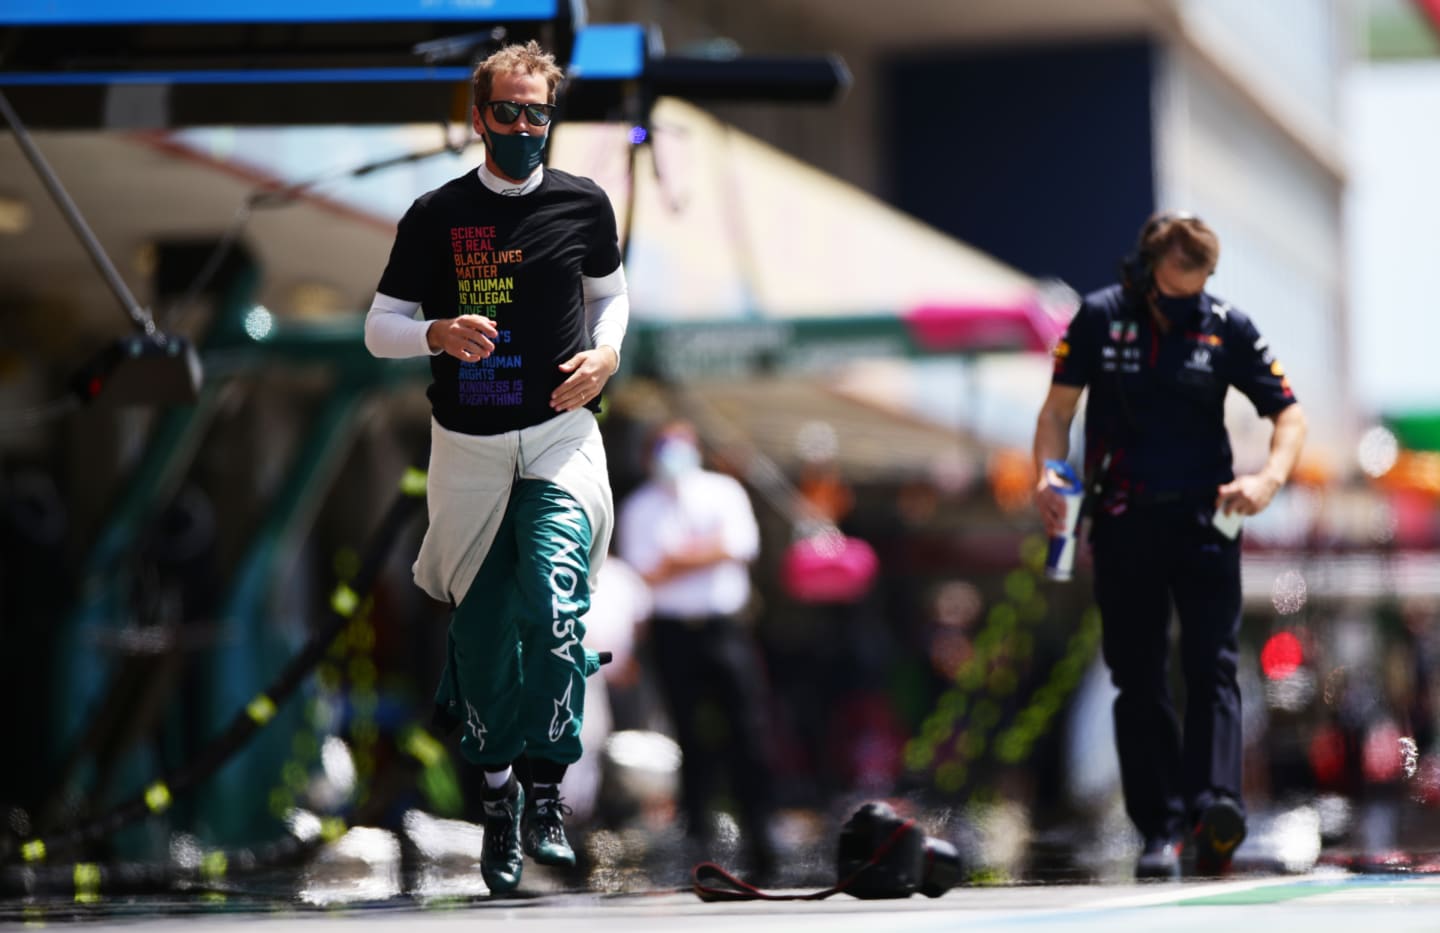 PORTIMAO, PORTUGAL - MAY 02: Sebastian Vettel of Germany and Aston Martin F1 Team runs to the grid during the F1 Grand Prix of Portugal at Autodromo Internacional Do Algarve on May 02, 2021 in Portimao, Portugal. (Photo by Peter Fox/Getty Images)